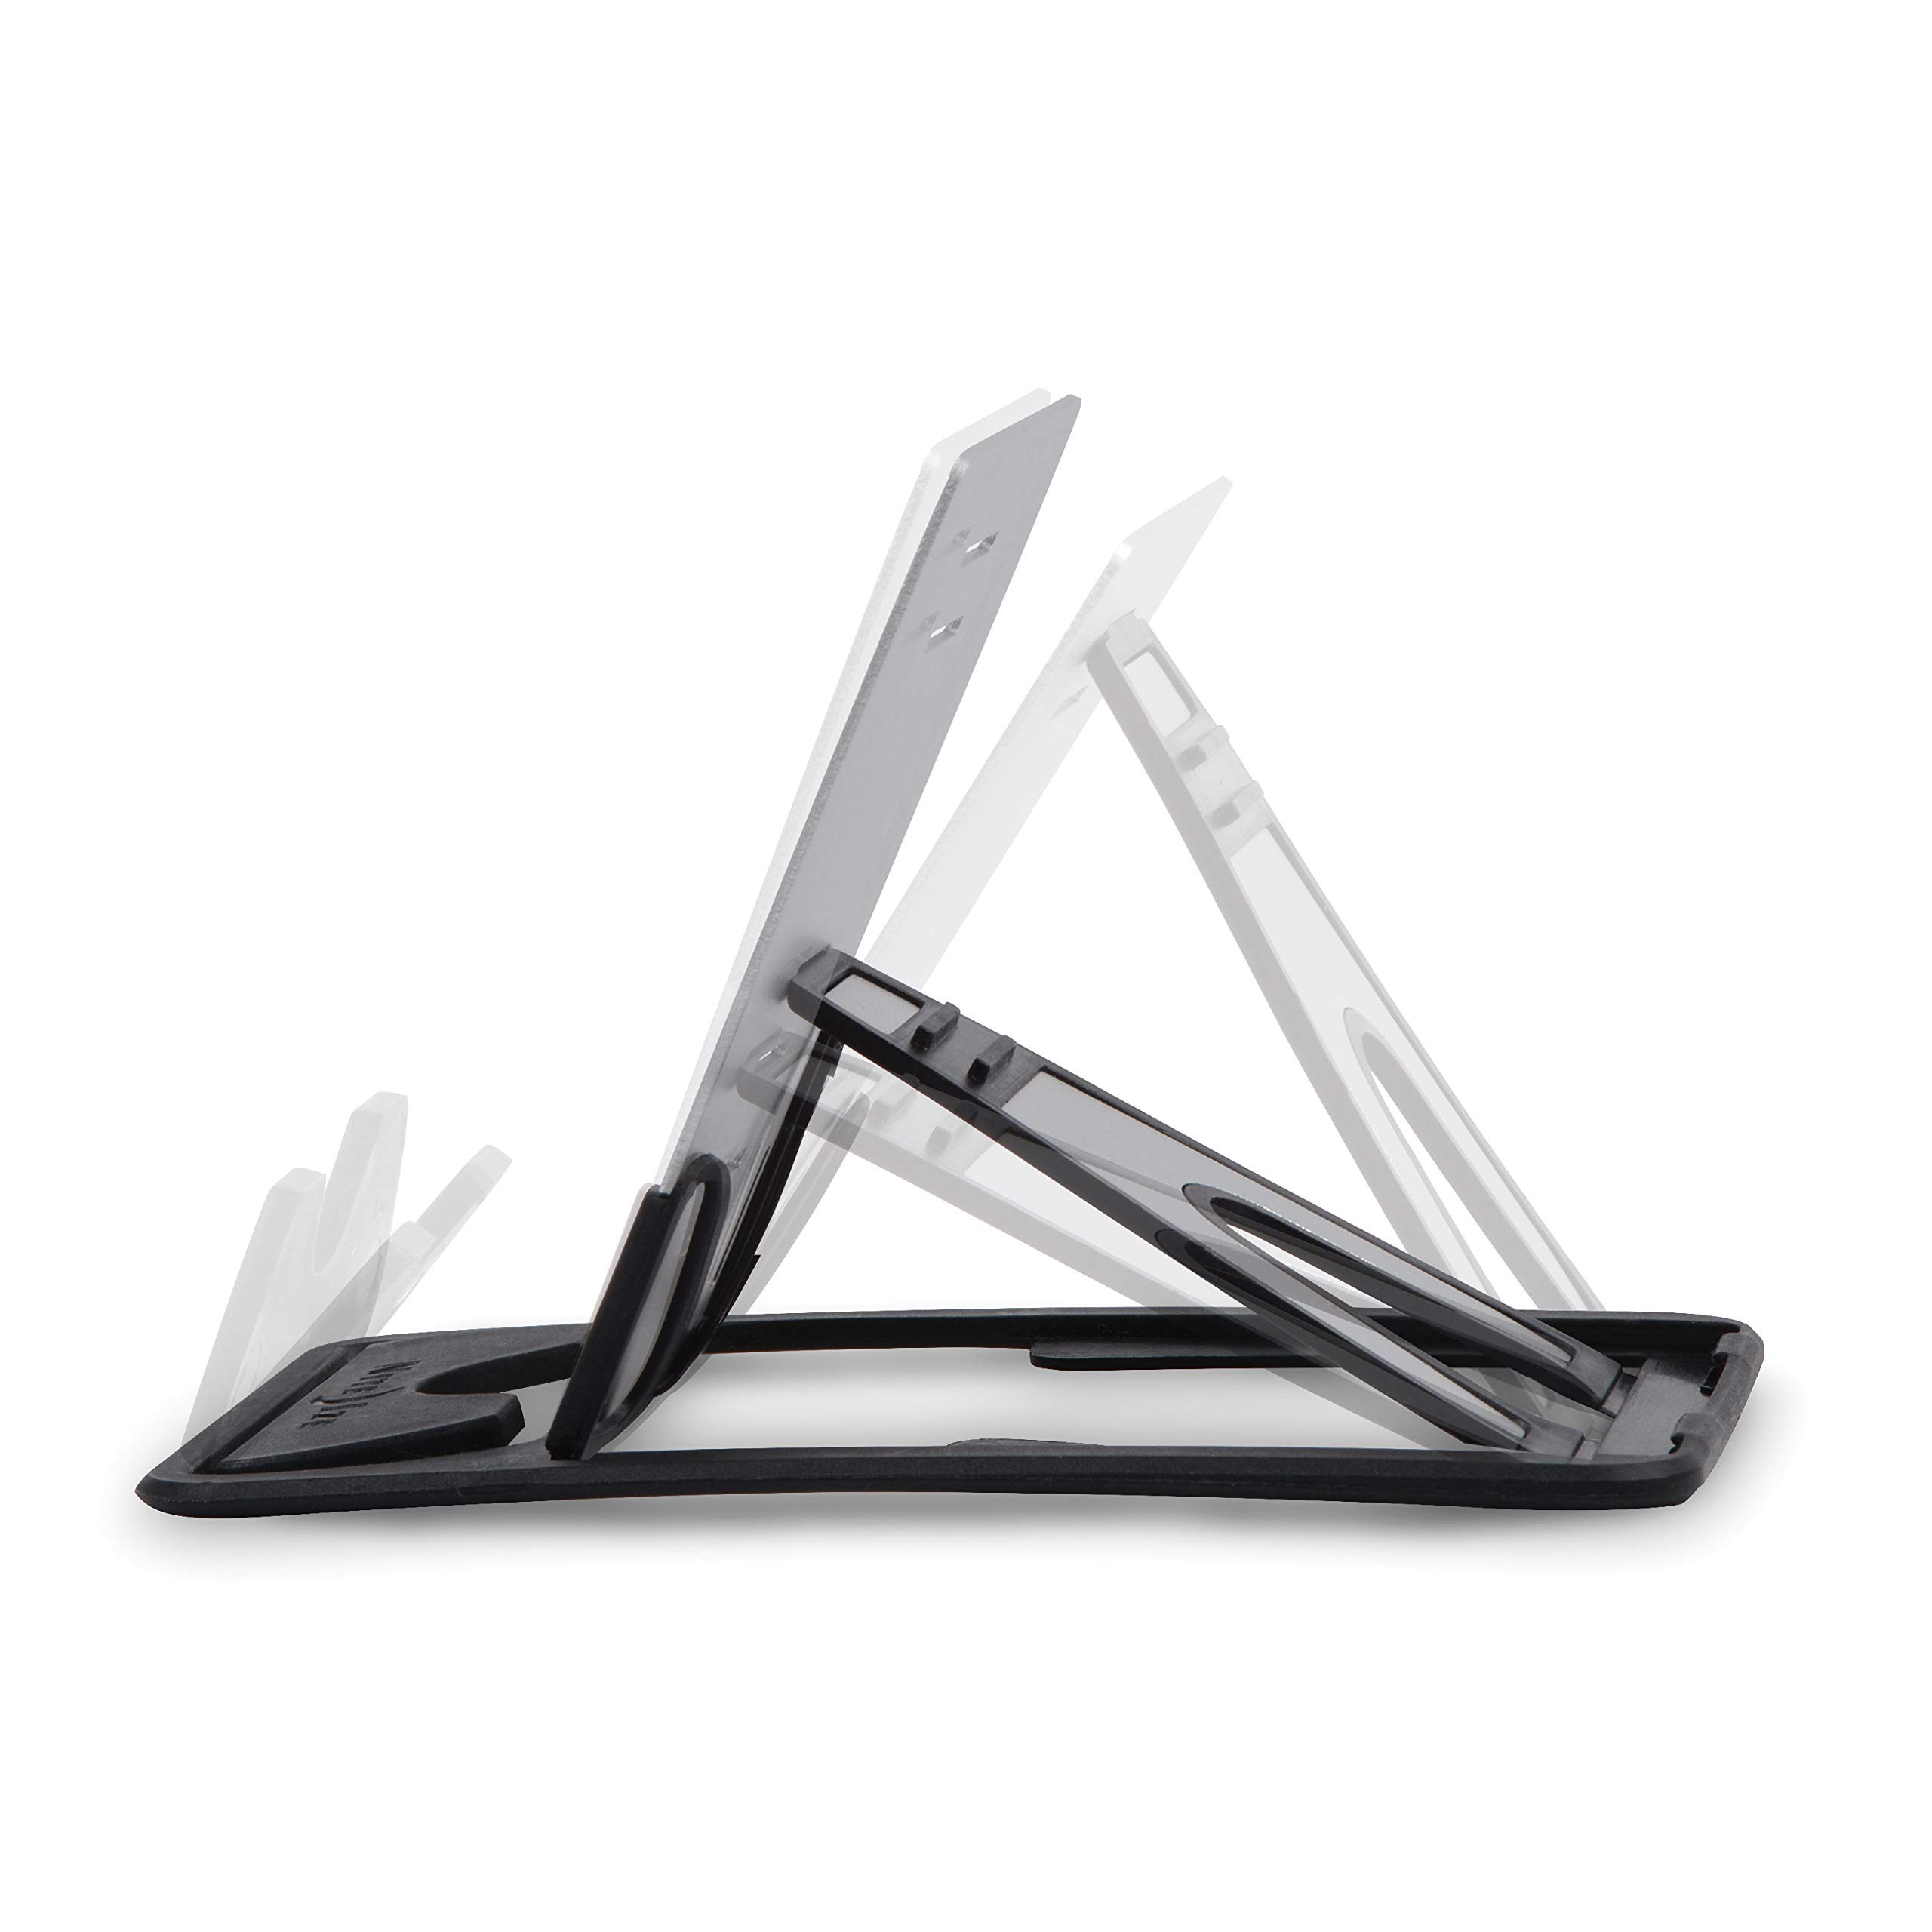 NiteIze QuickStand Portable Mobile Device Stand